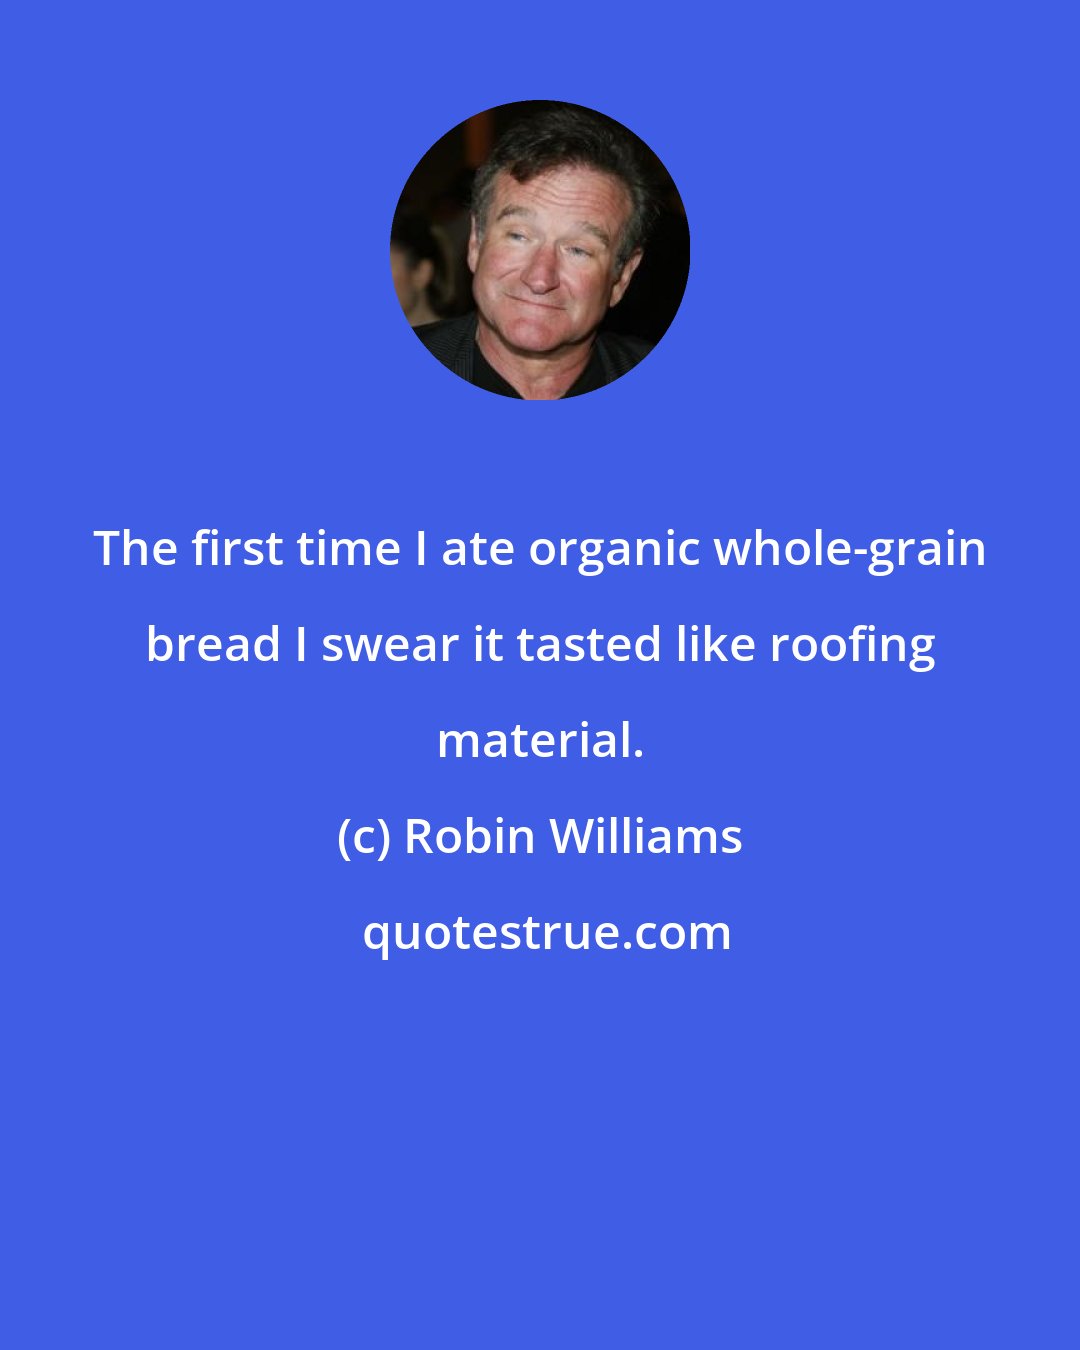 Robin Williams: The first time I ate organic whole-grain bread I swear it tasted like roofing material.